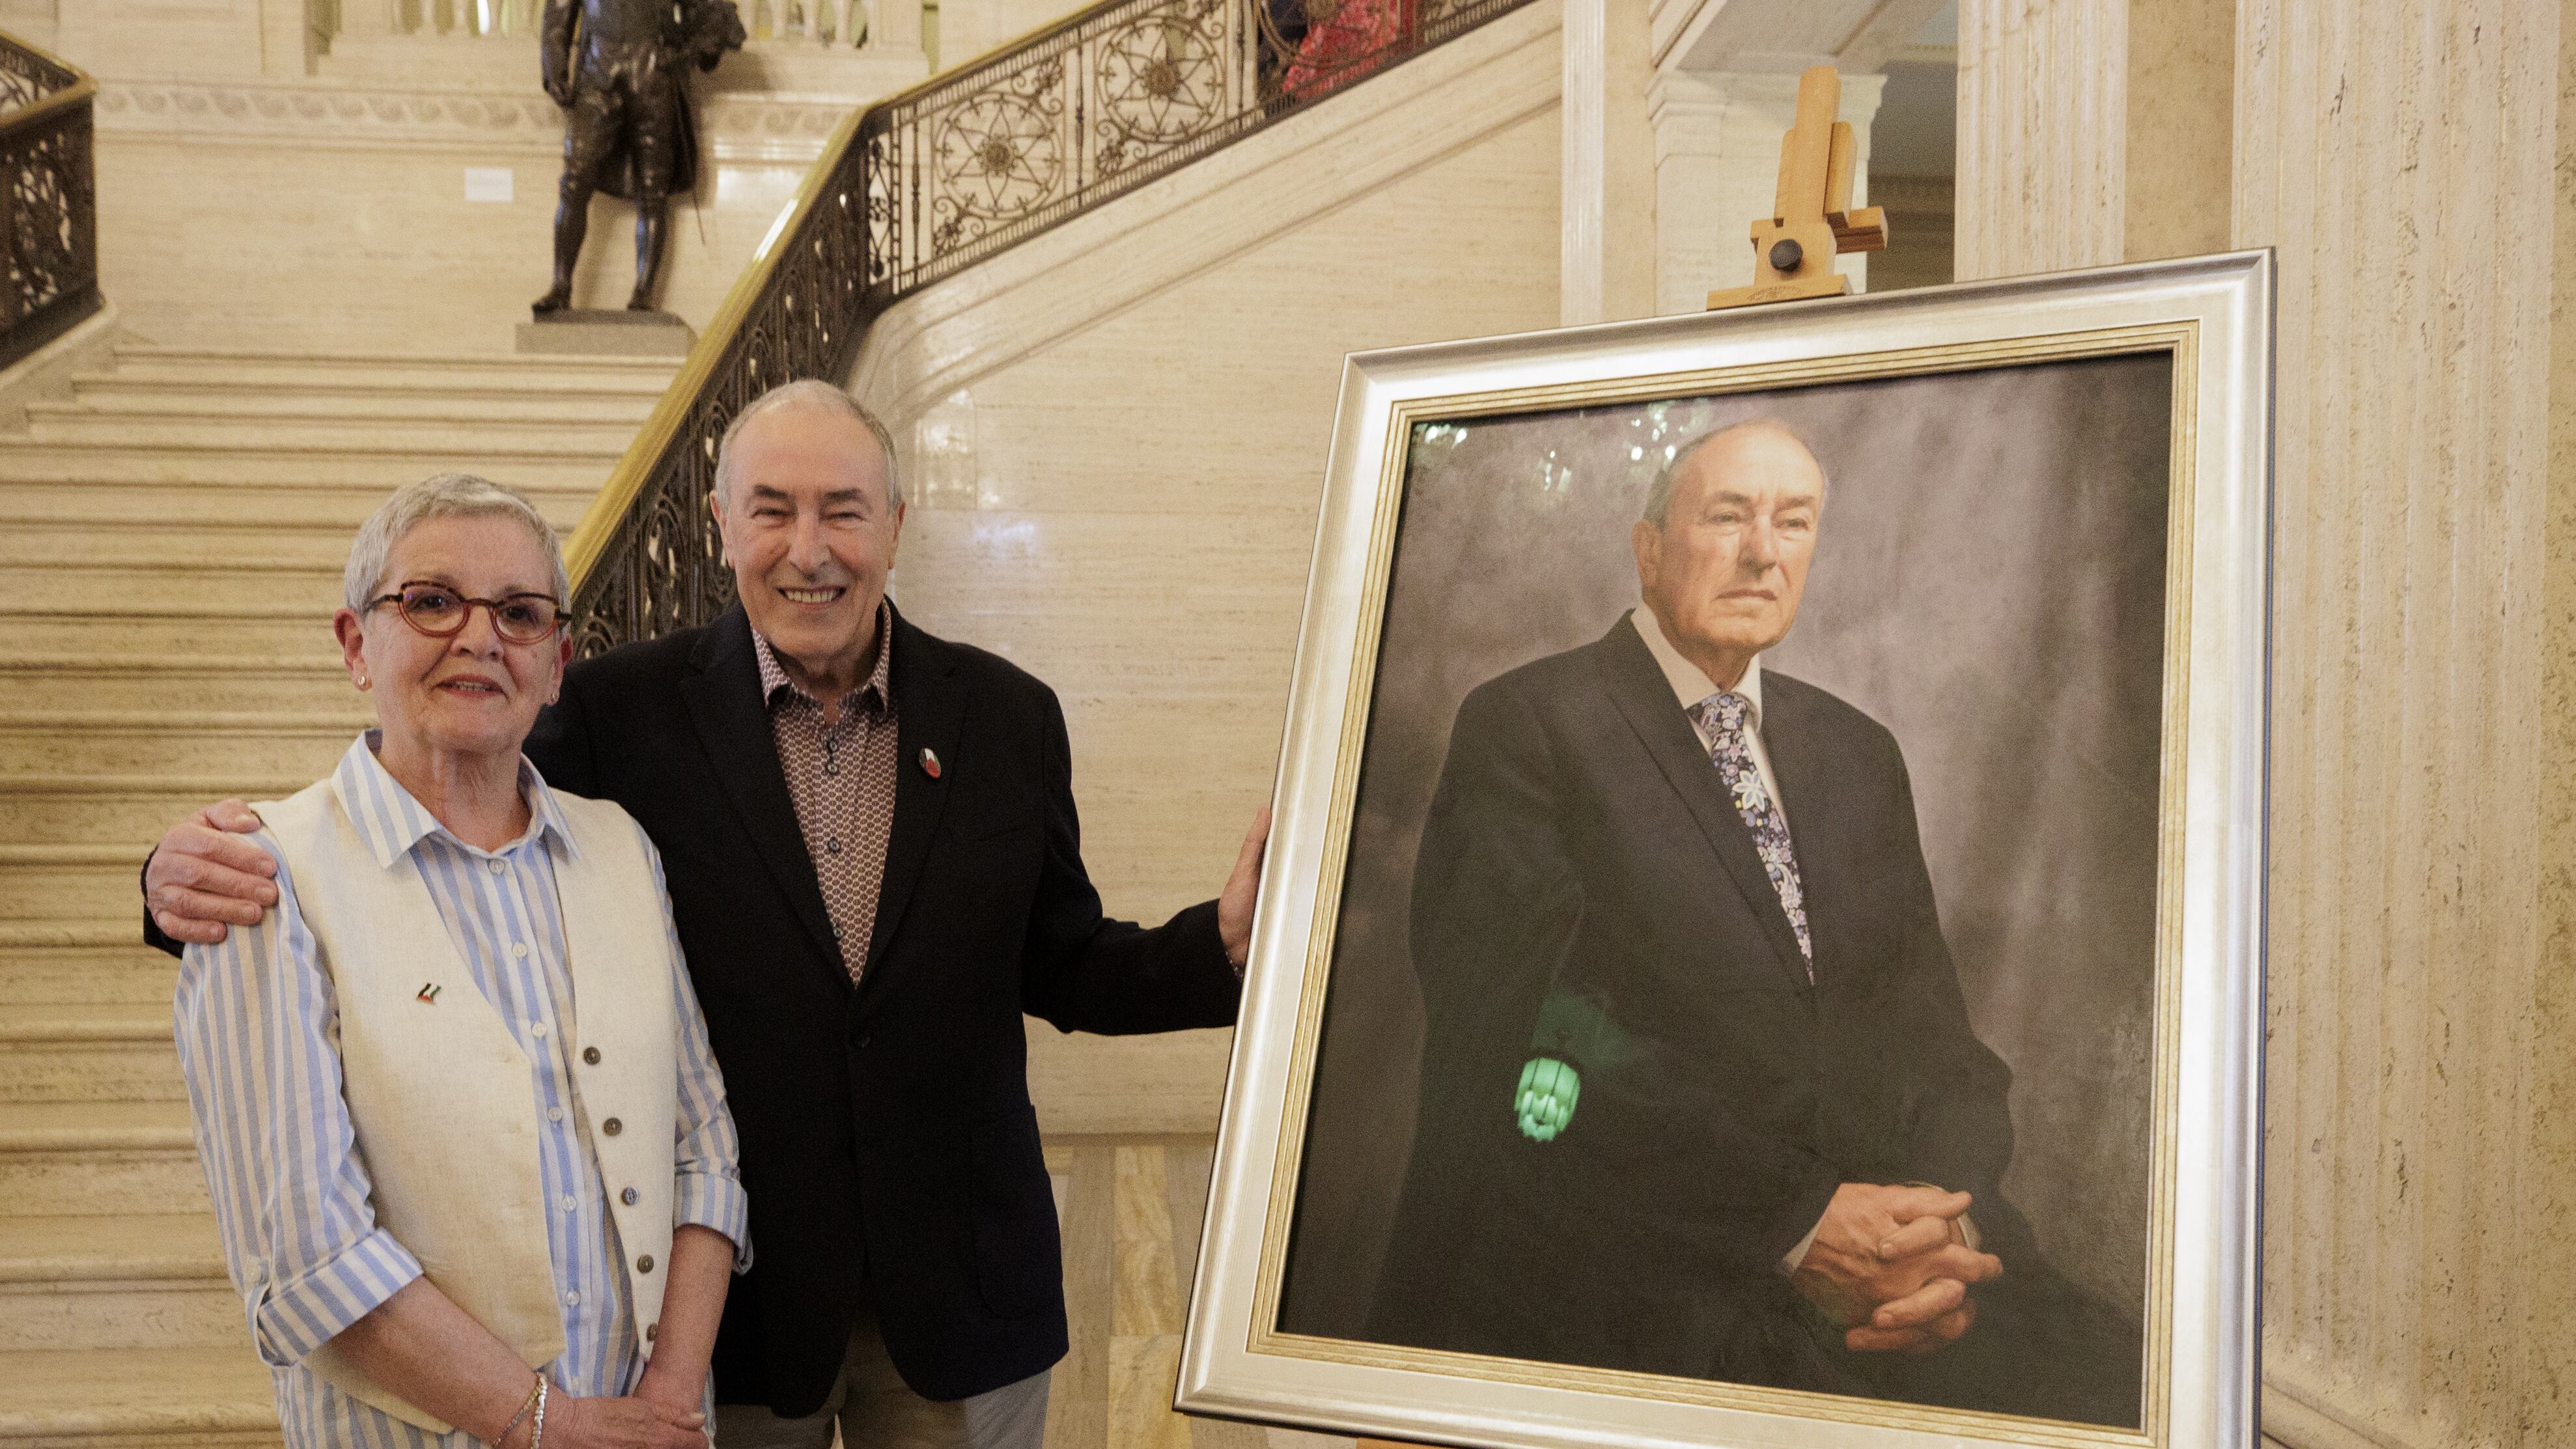 Former Stormont Assembly speaker Mitchel McLaughlin and his wife Marylou stand beside a portrait of himself, painted by Catherine Creaney, as it is unveiled in the Great Hall at Parliament Buildings